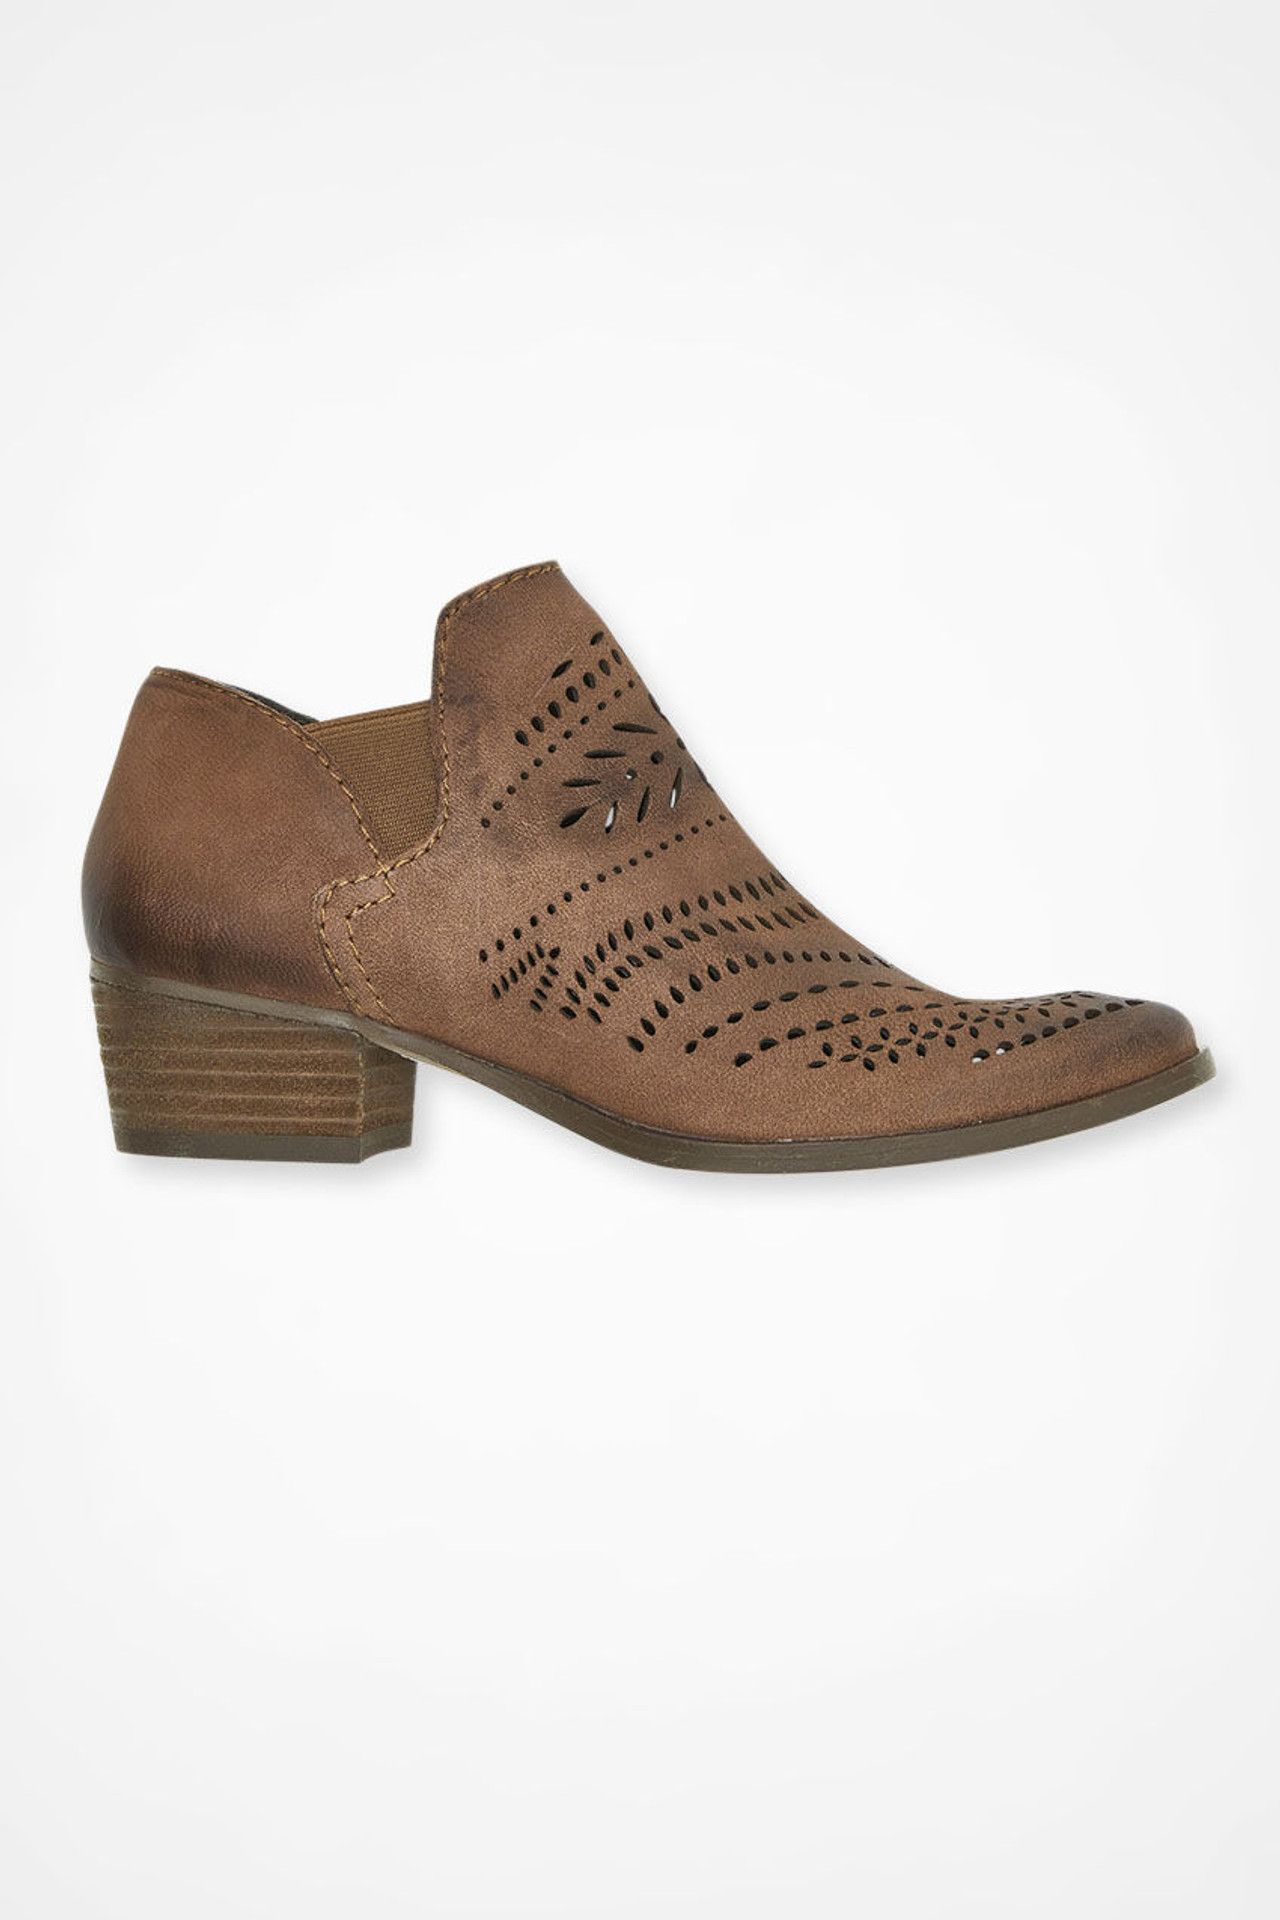 "Sun Valley" Ankle Boots by Walk With Me™